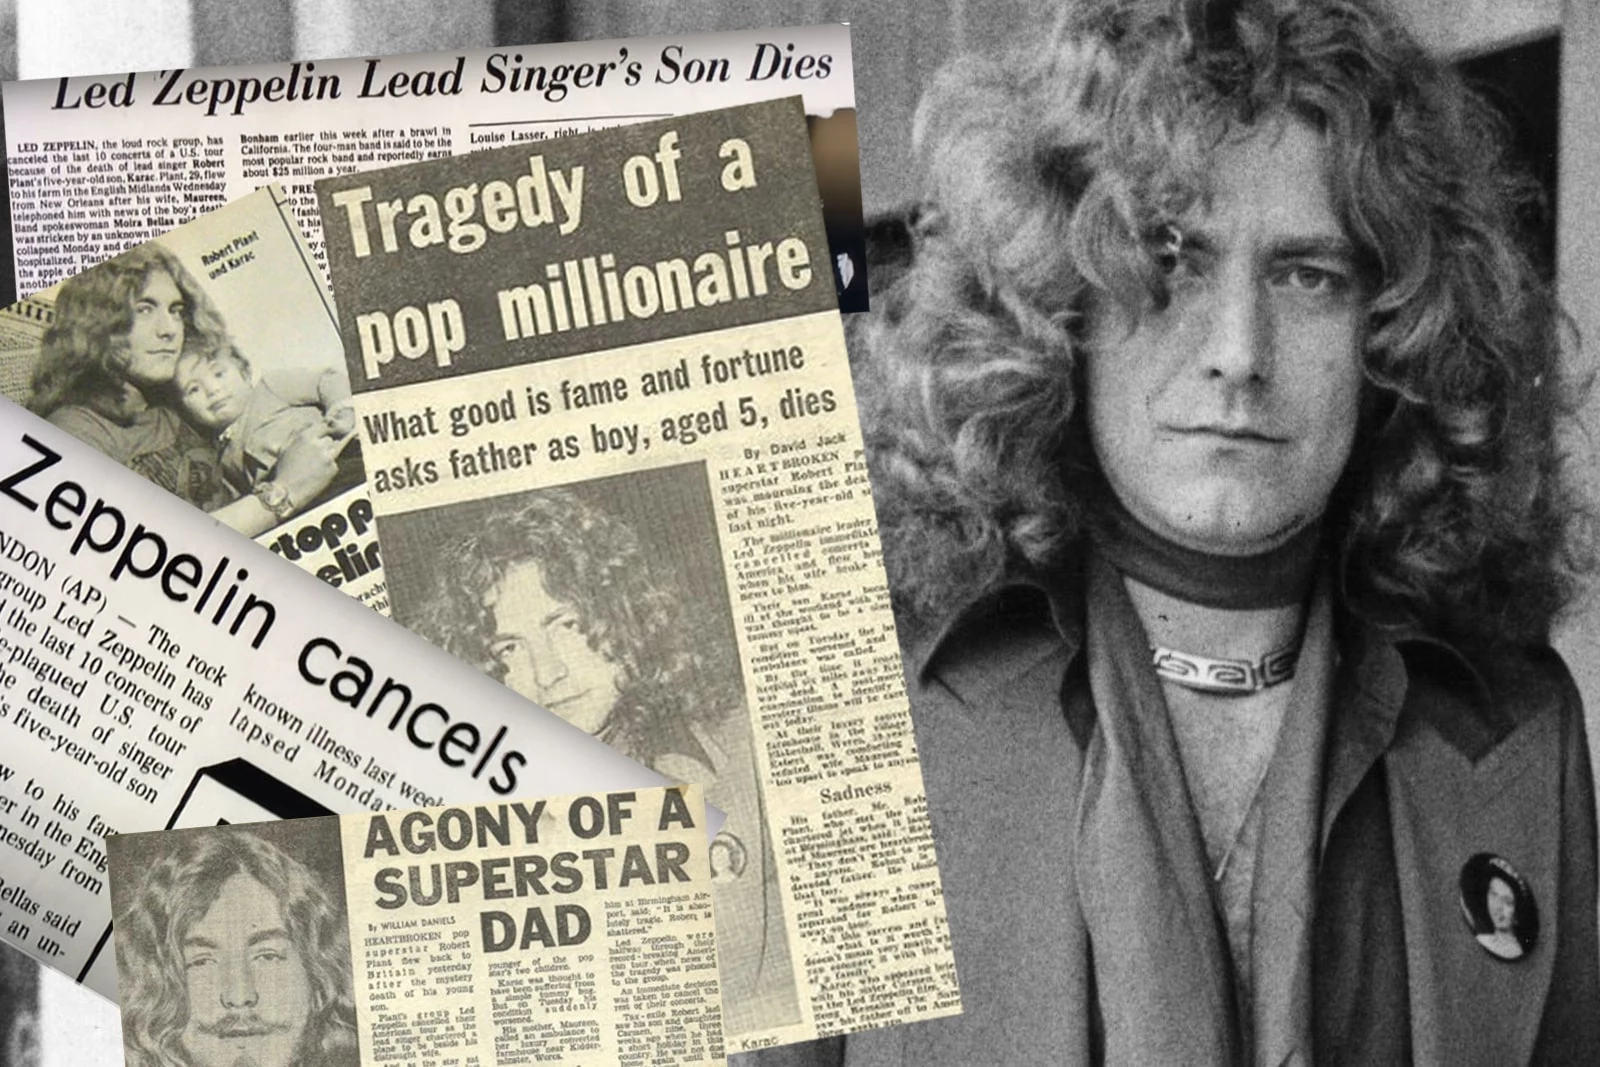 The Day a Tragic Loss Changed Led Zeppelin Forever